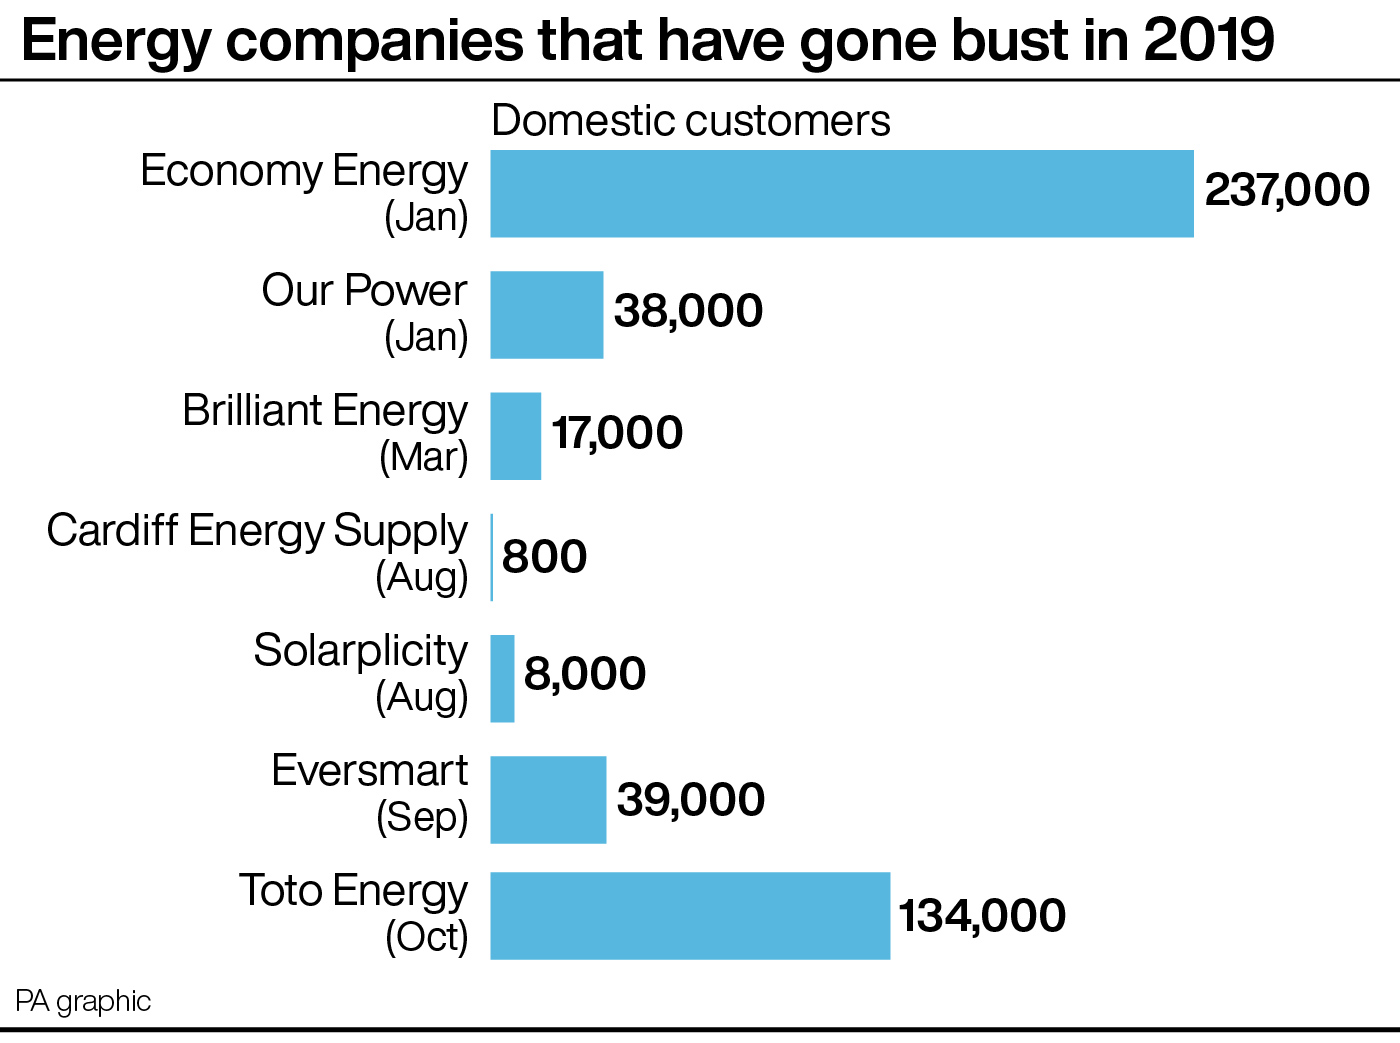 Bust energy firms in 2019